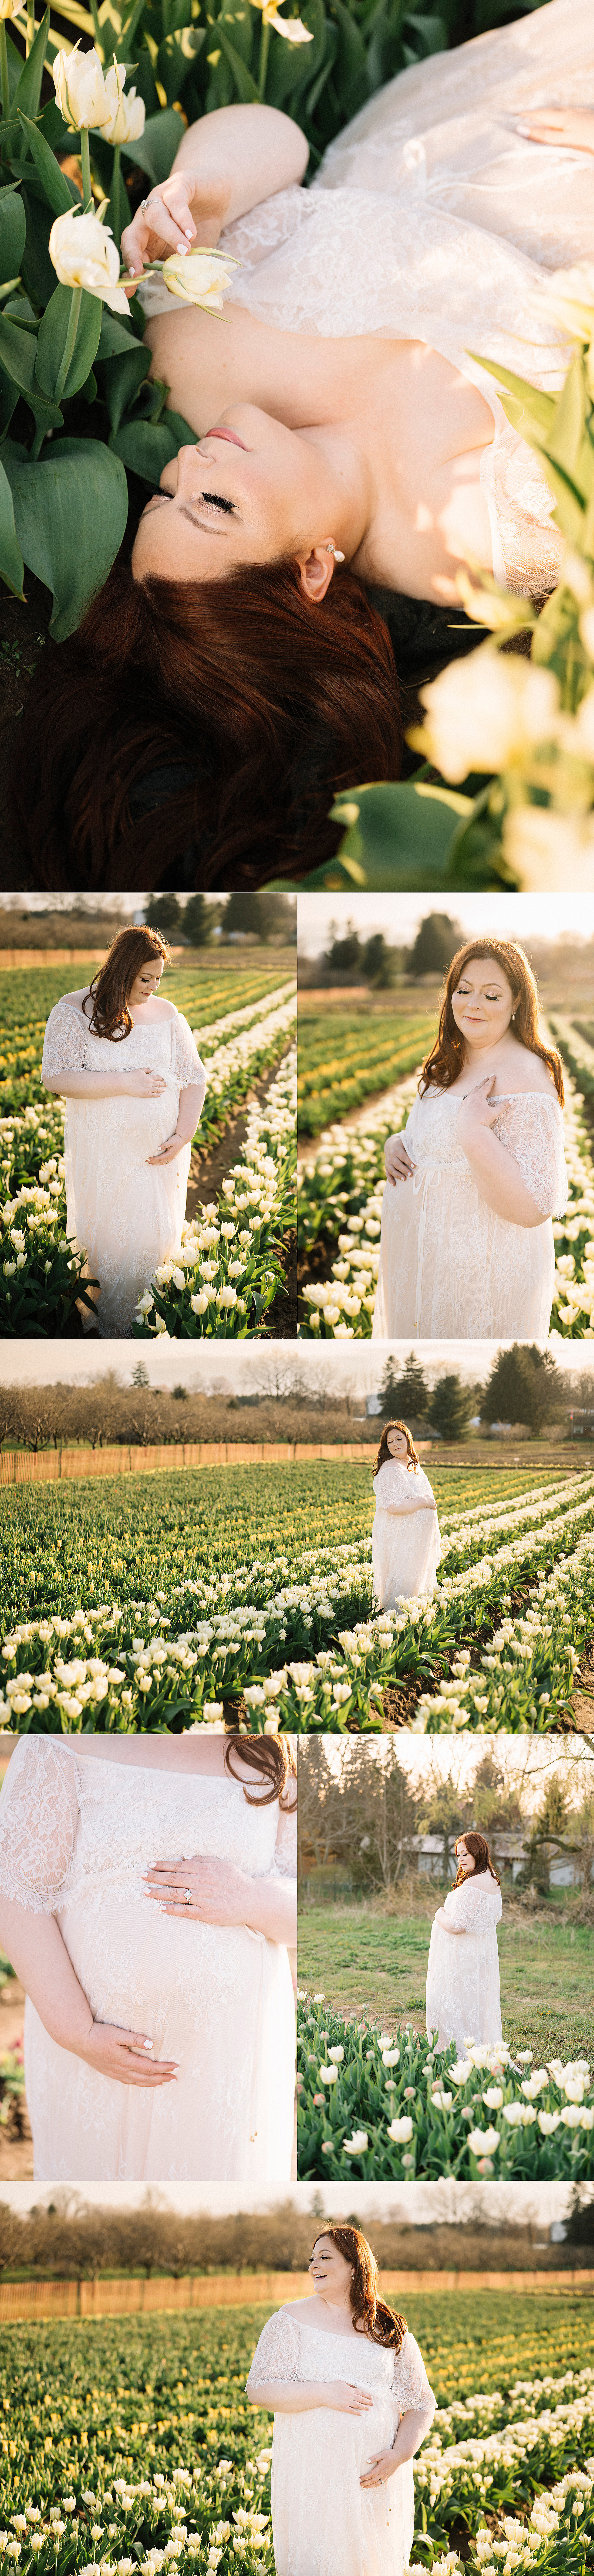 artistic maternity portraits in field of tulips